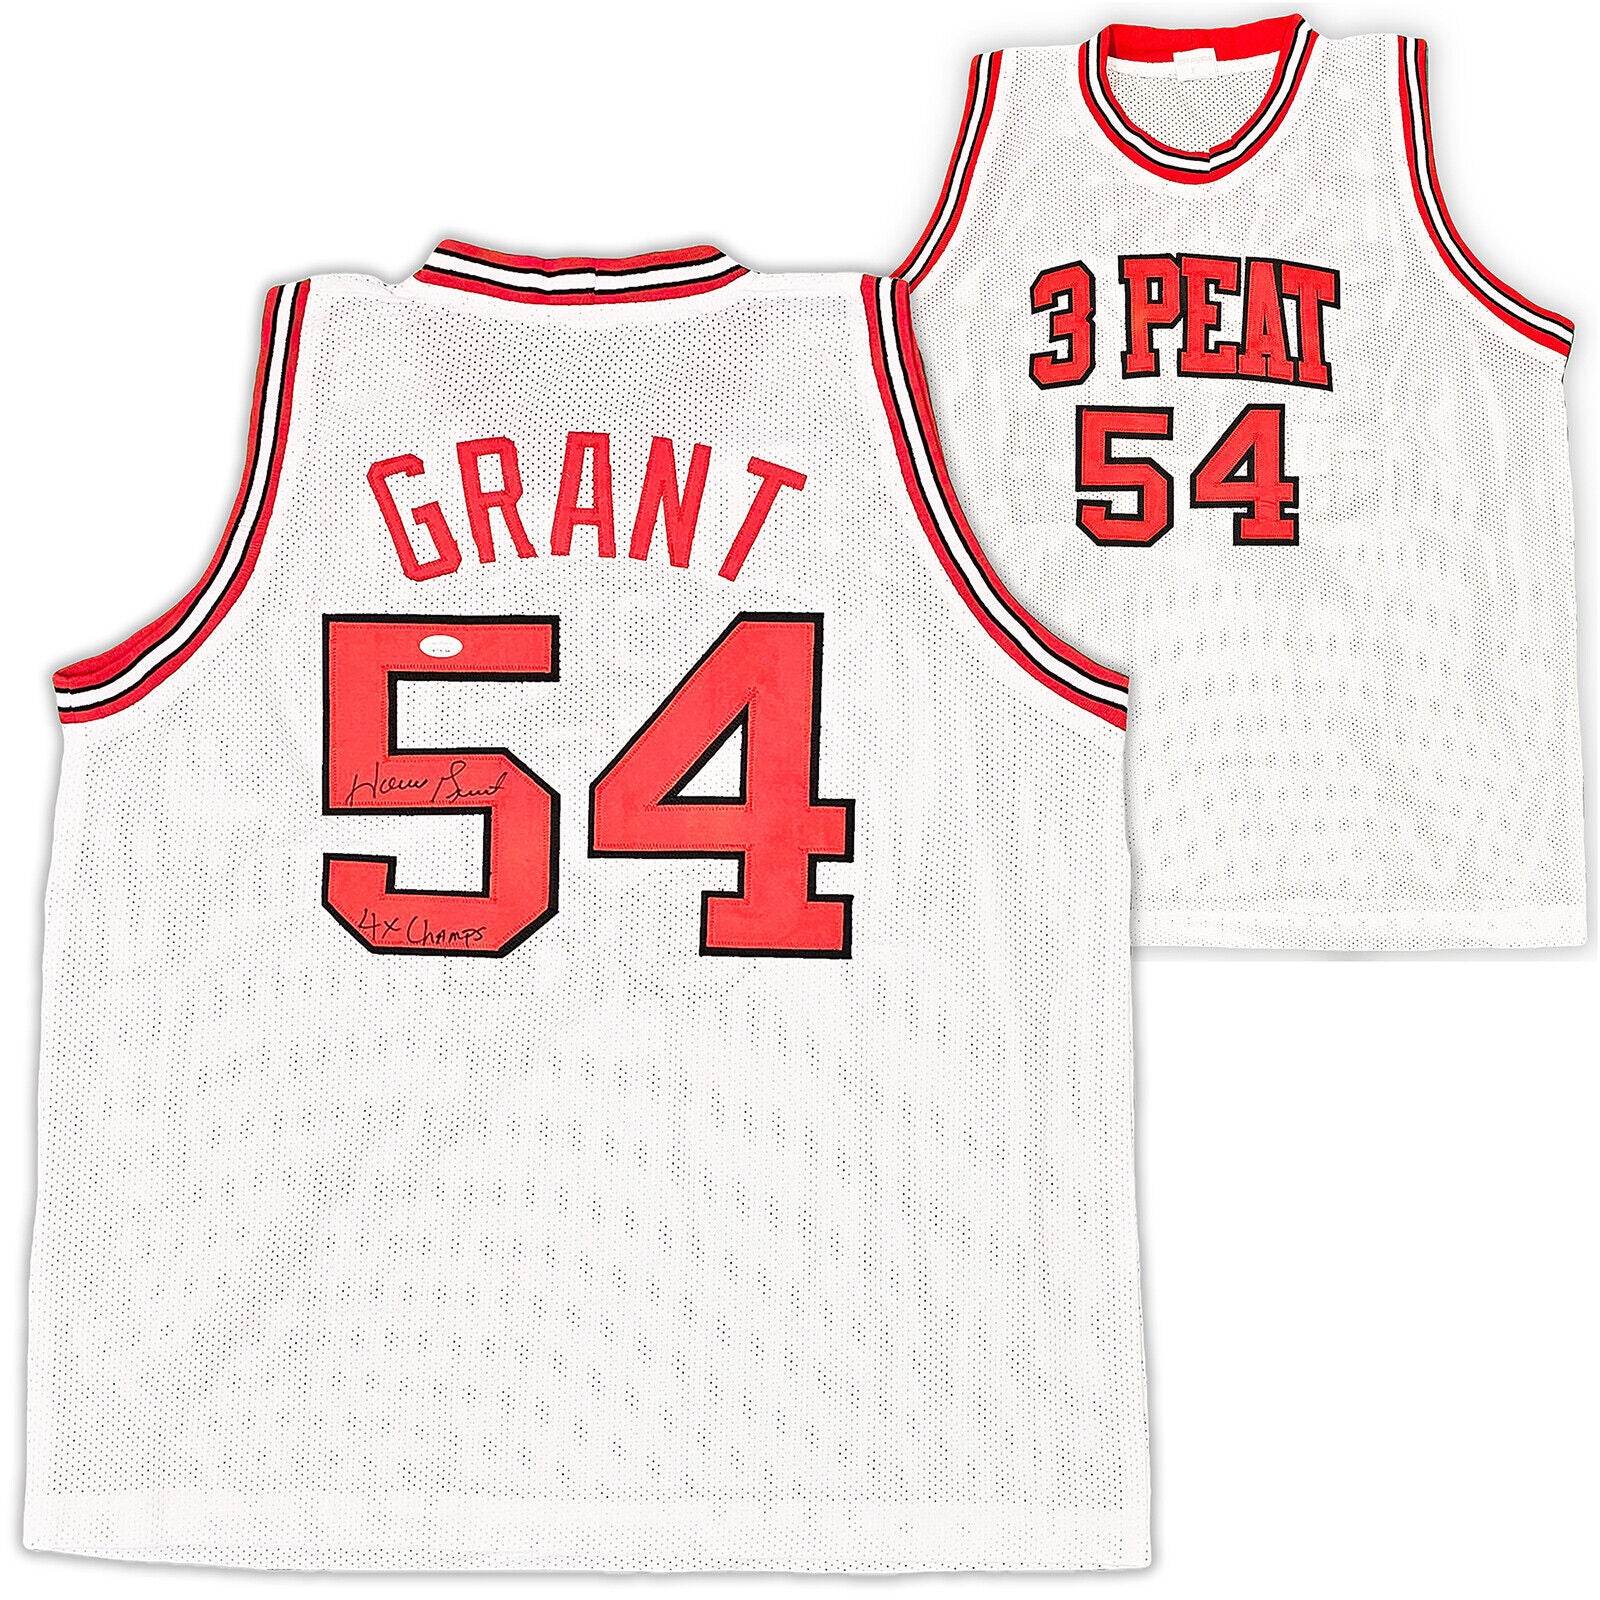 CHICAGO BULLS HORACE GRANT AUTOGRAPHED WHITE JERSEY 4X CHAMPS